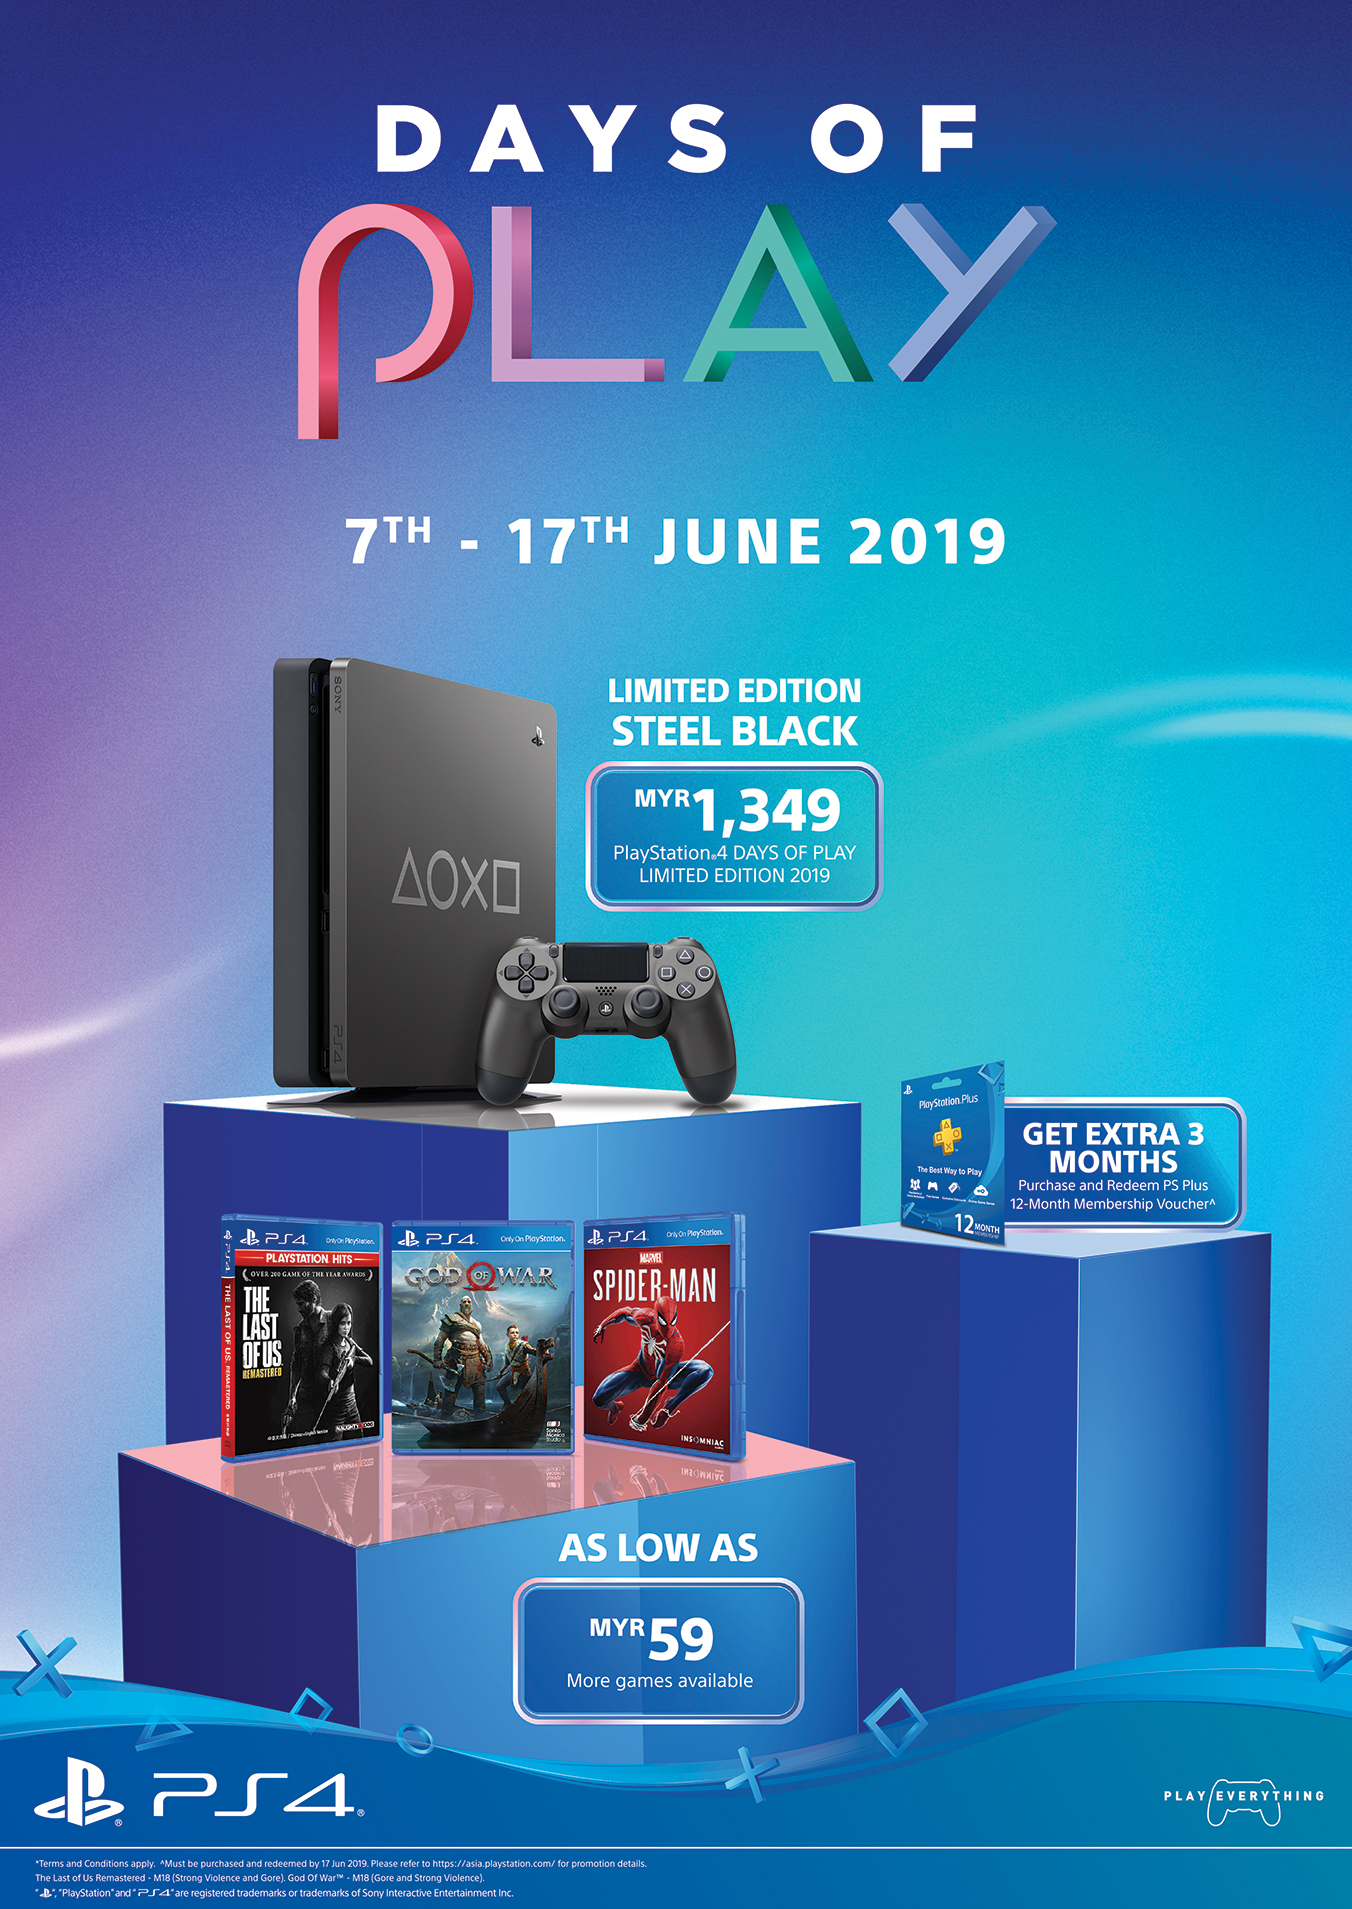 PS4 DAYS OF PLAY LIMITED EDITION - AVAILABLE FROM JUNE 7, 2019